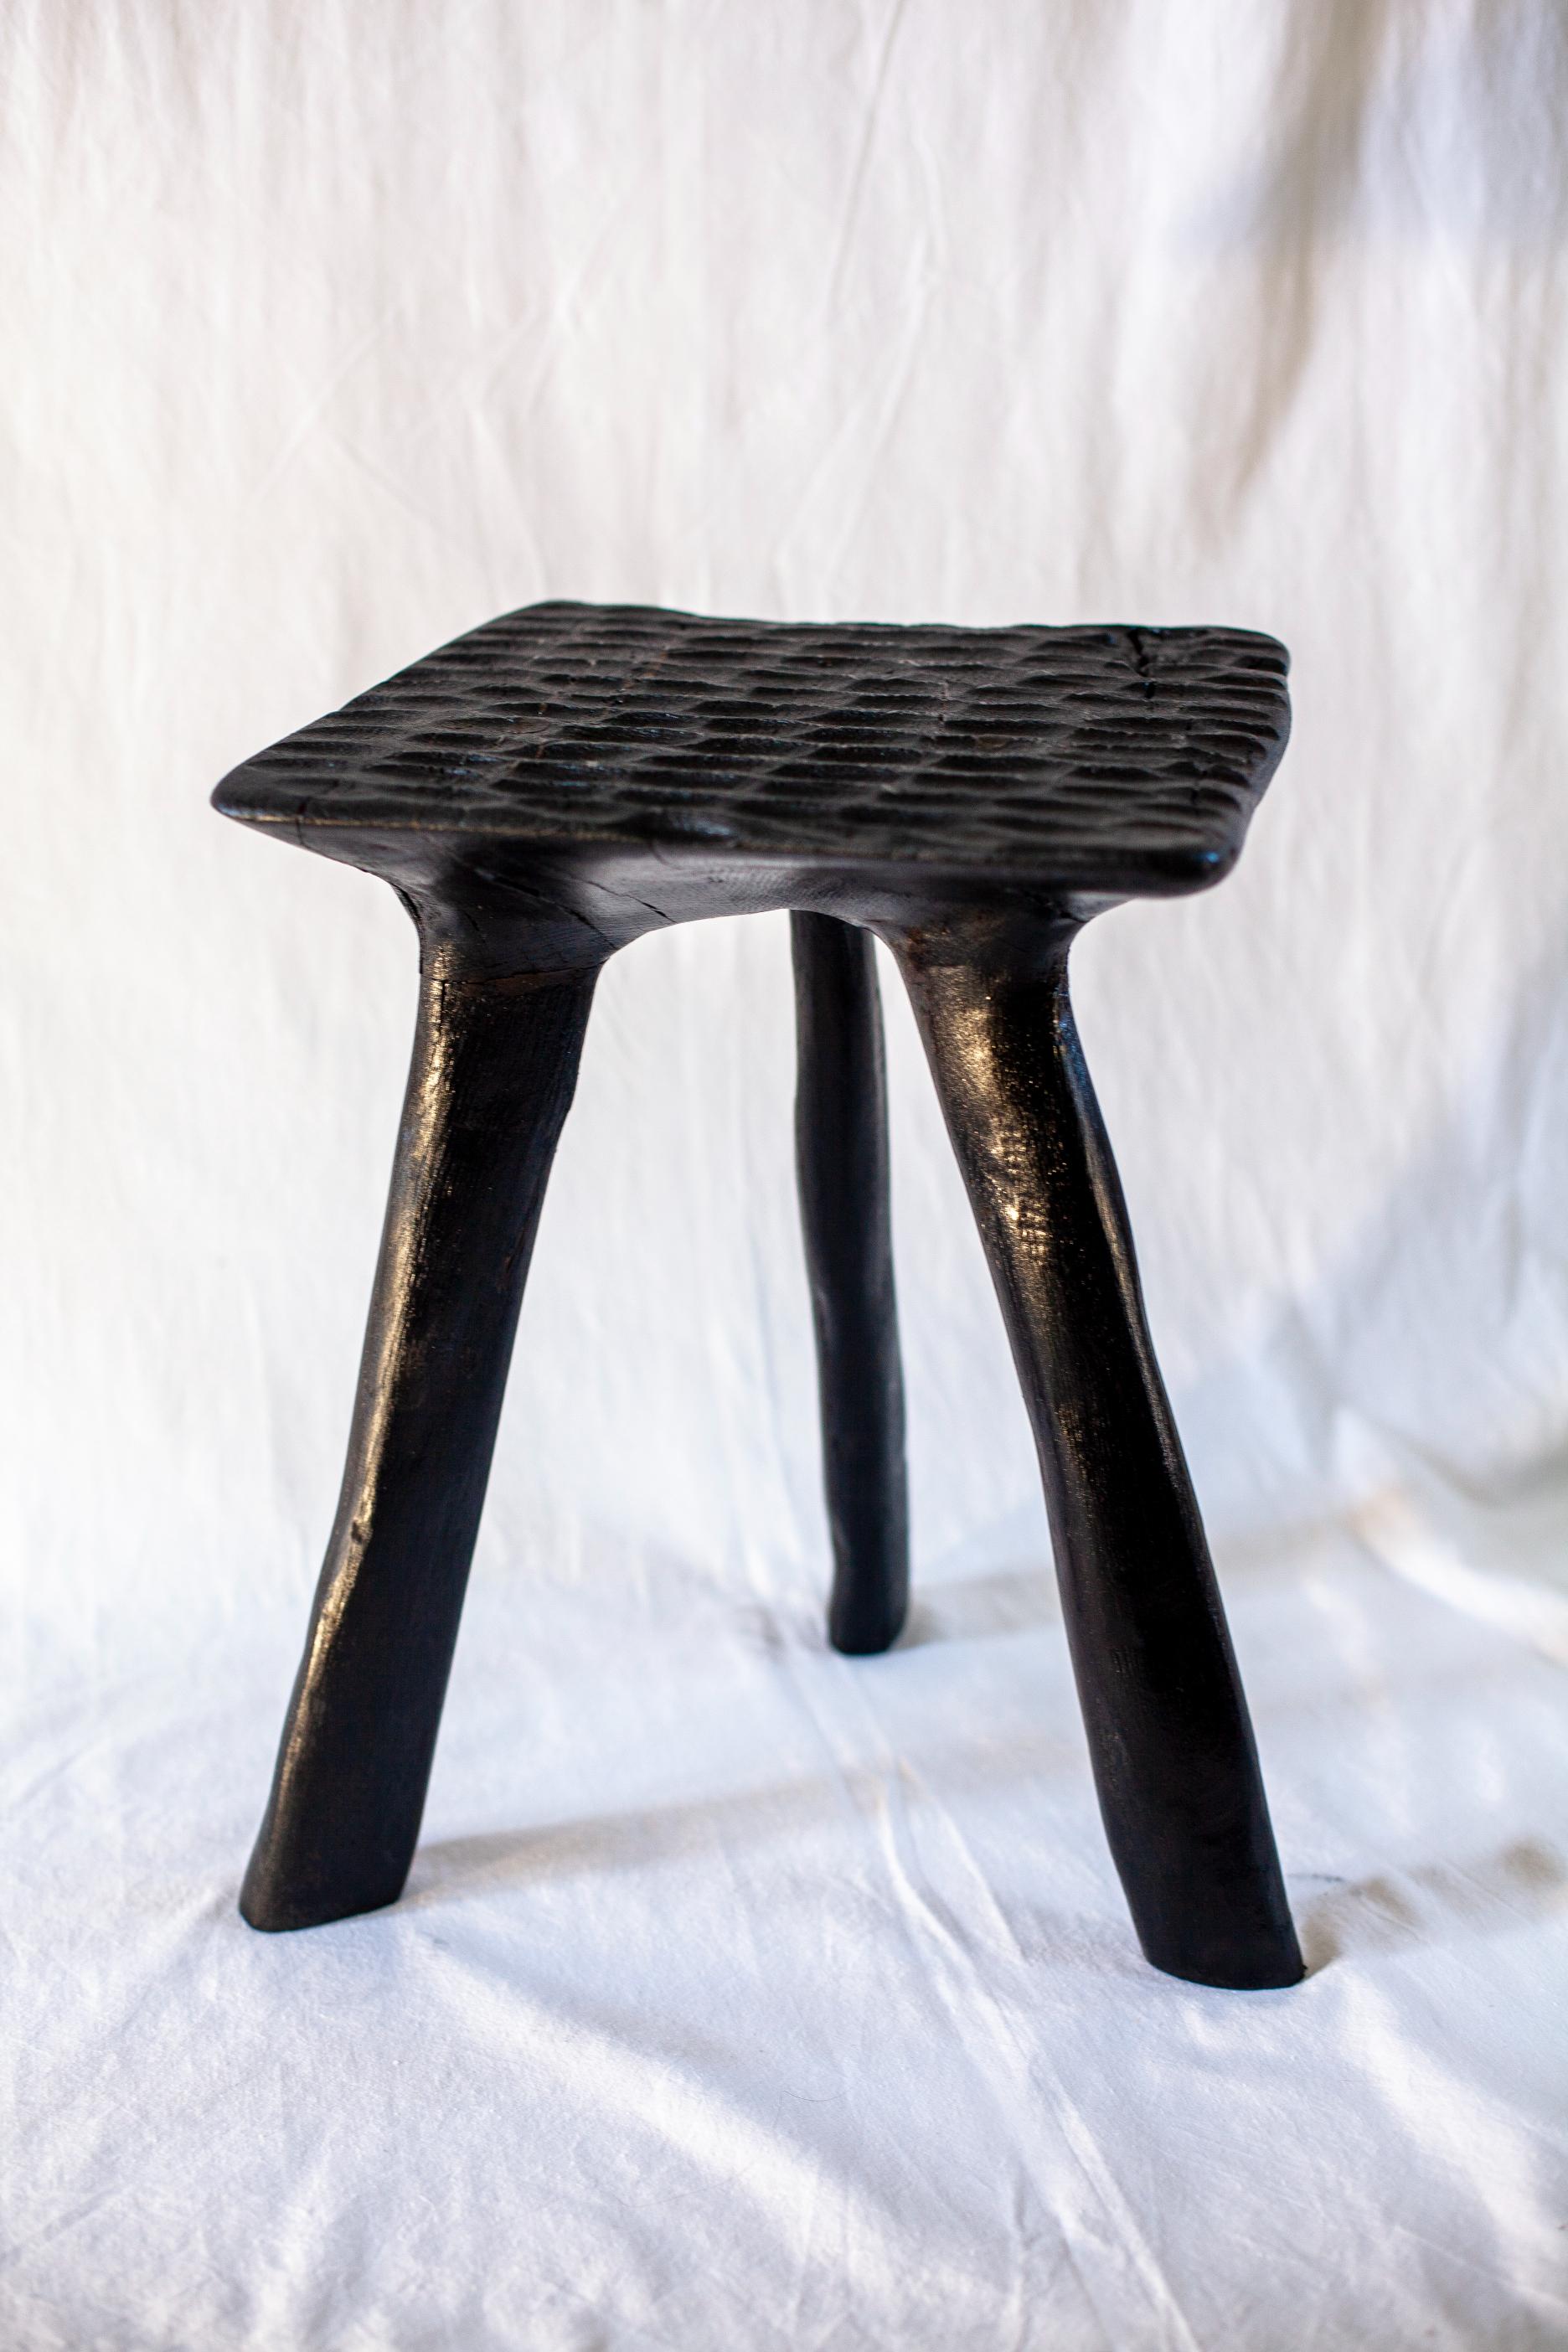 Stool Eclipse 4 by Antoine Maurice
Dimensions: W 40 x D 30 x H 50 cm
Materials: Solid oak beams, assembled, carved and burned


Ethnic-inspired, the Eclipse range of furniture gives pride of place to primitive lines… as well as recycled